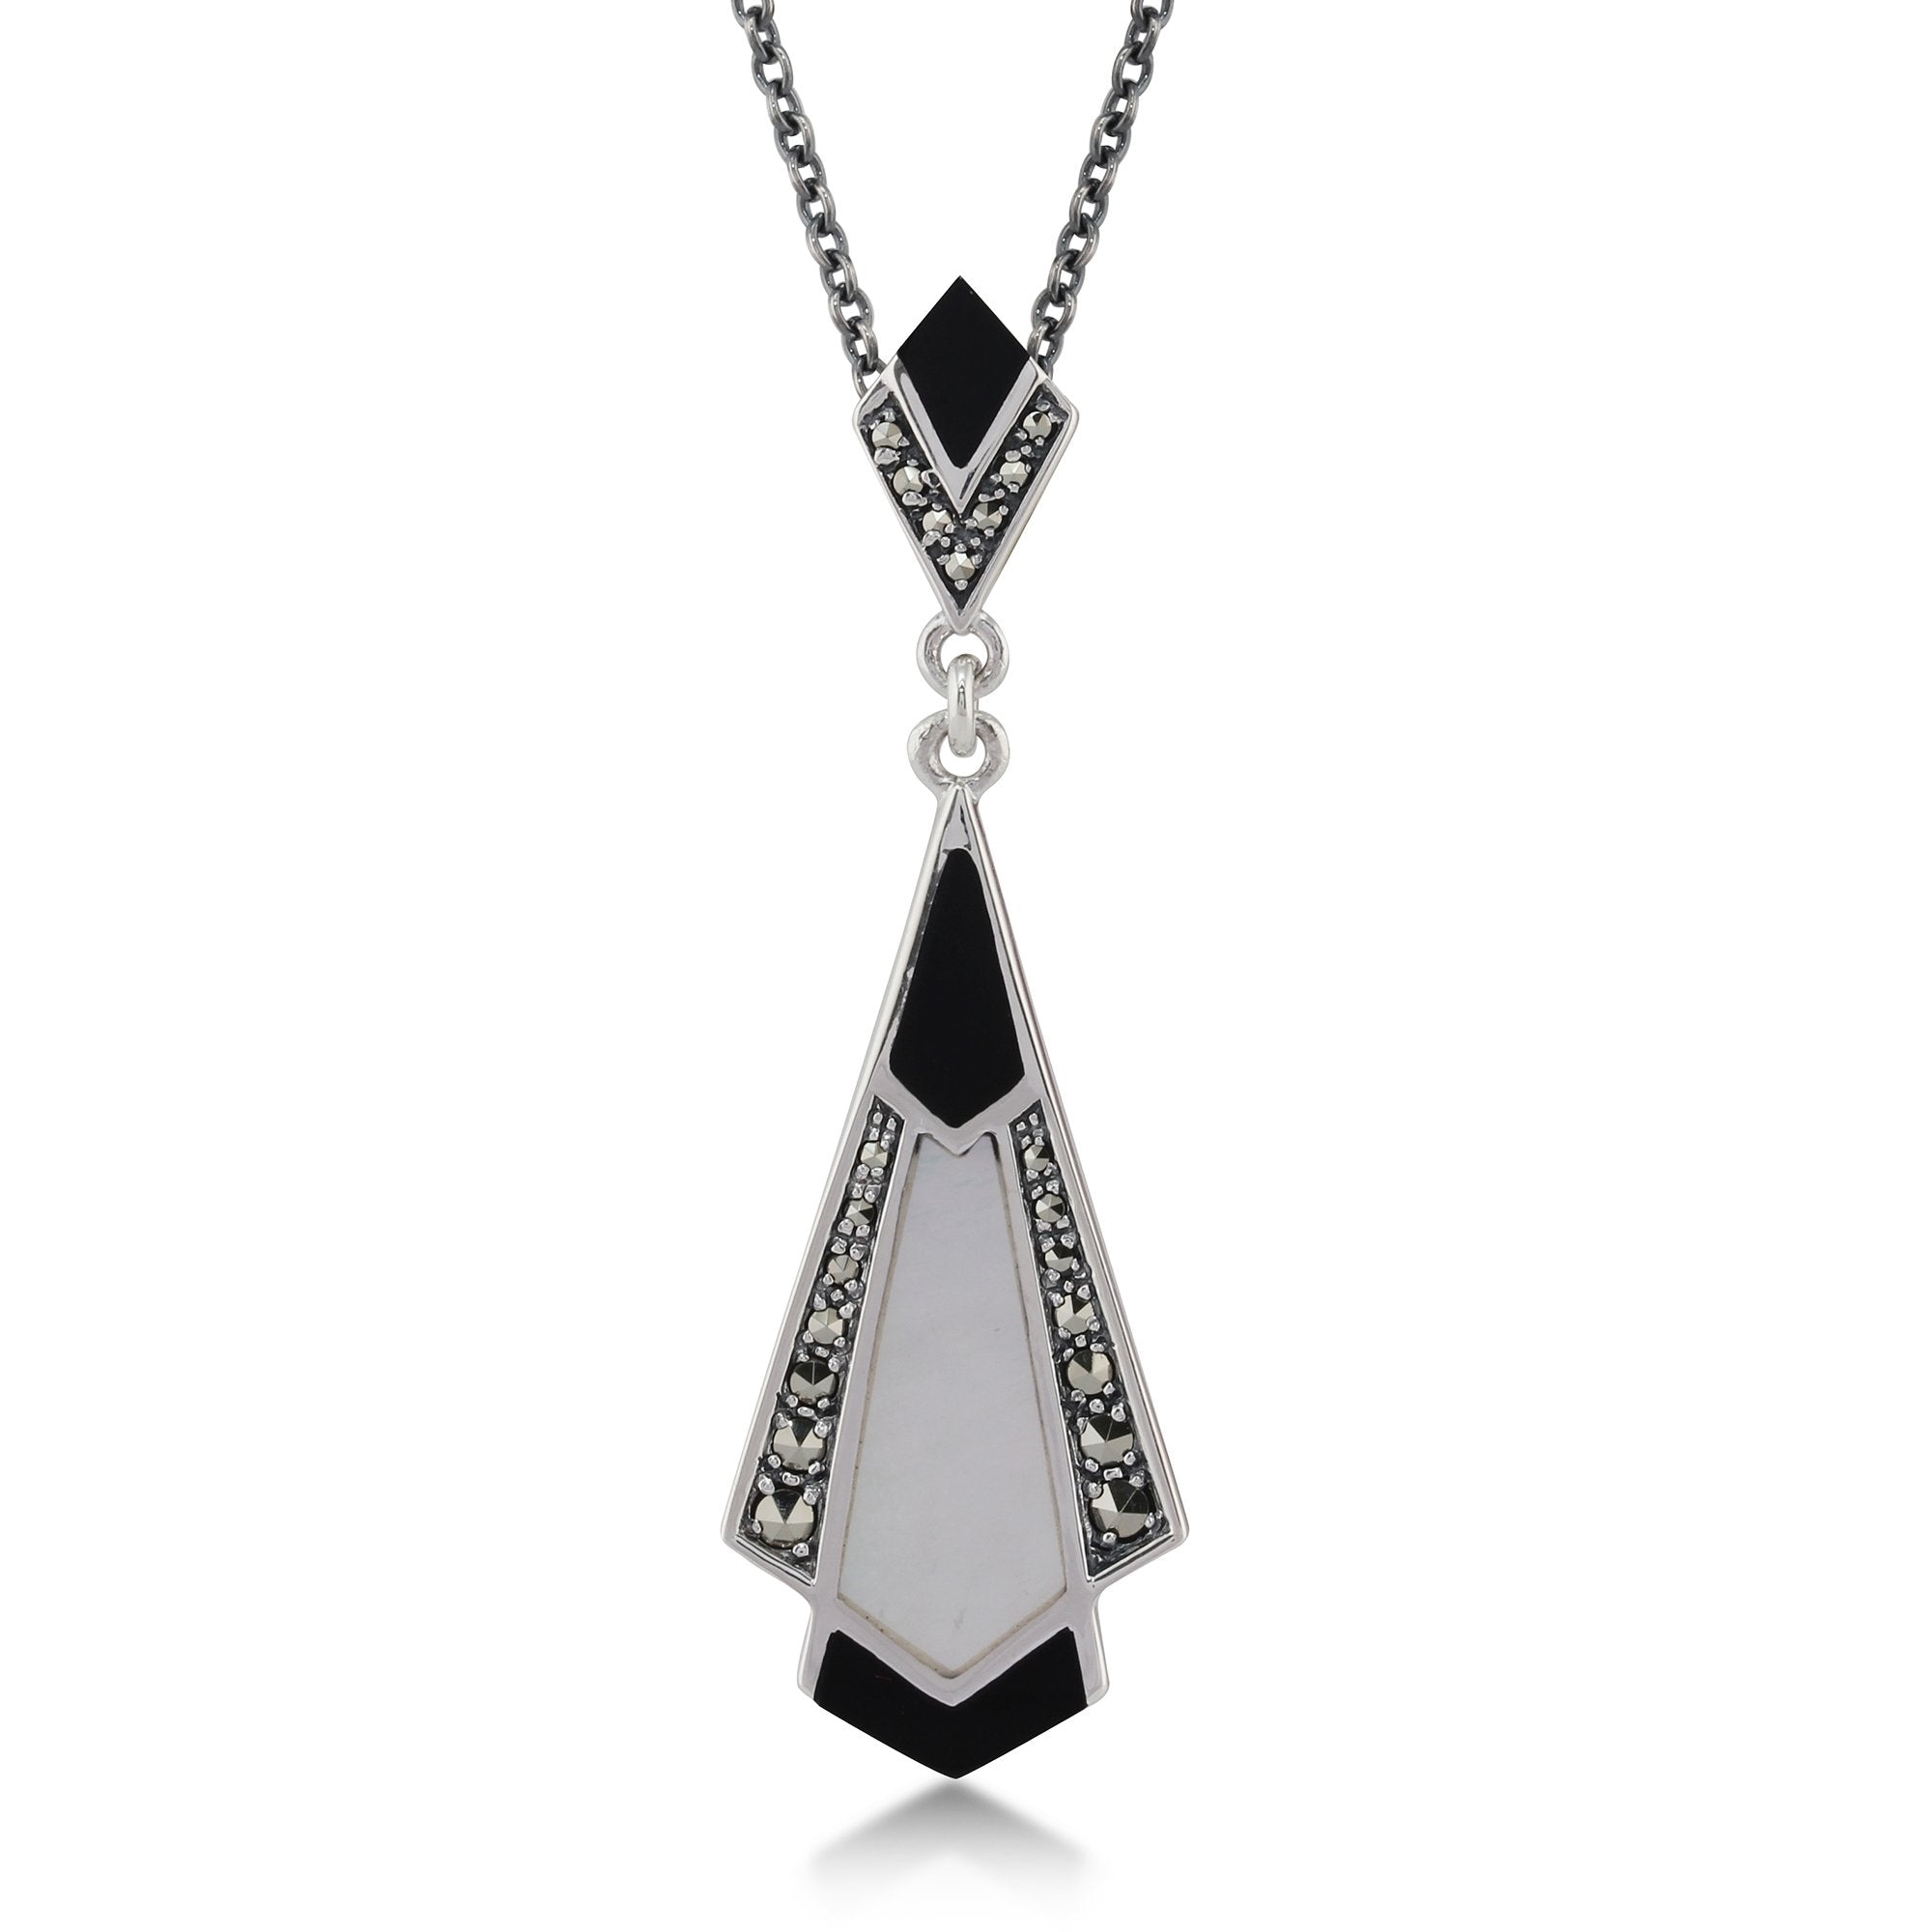 Art Deco Style Cabochon Black Onyx, Mother of Pearl & Marcasite Pendant in 925 Sterling Silver